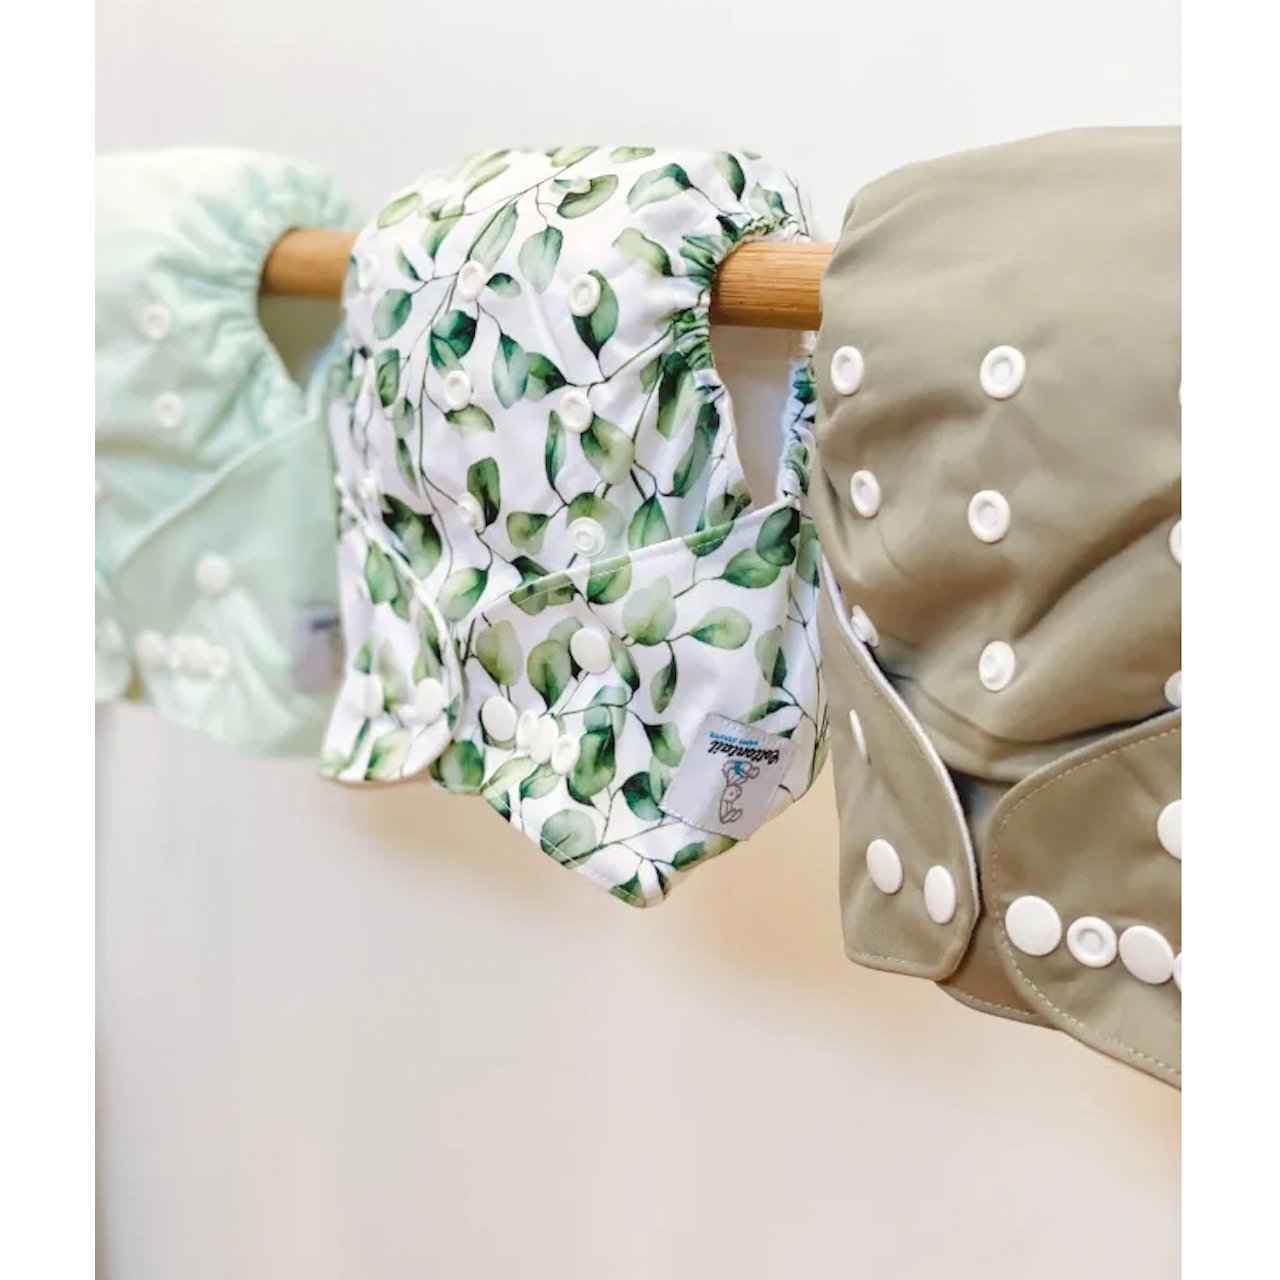 3 Cottontail Modern Cloth Nappy - Eucalyptus 3 Pack - Little Kids Business